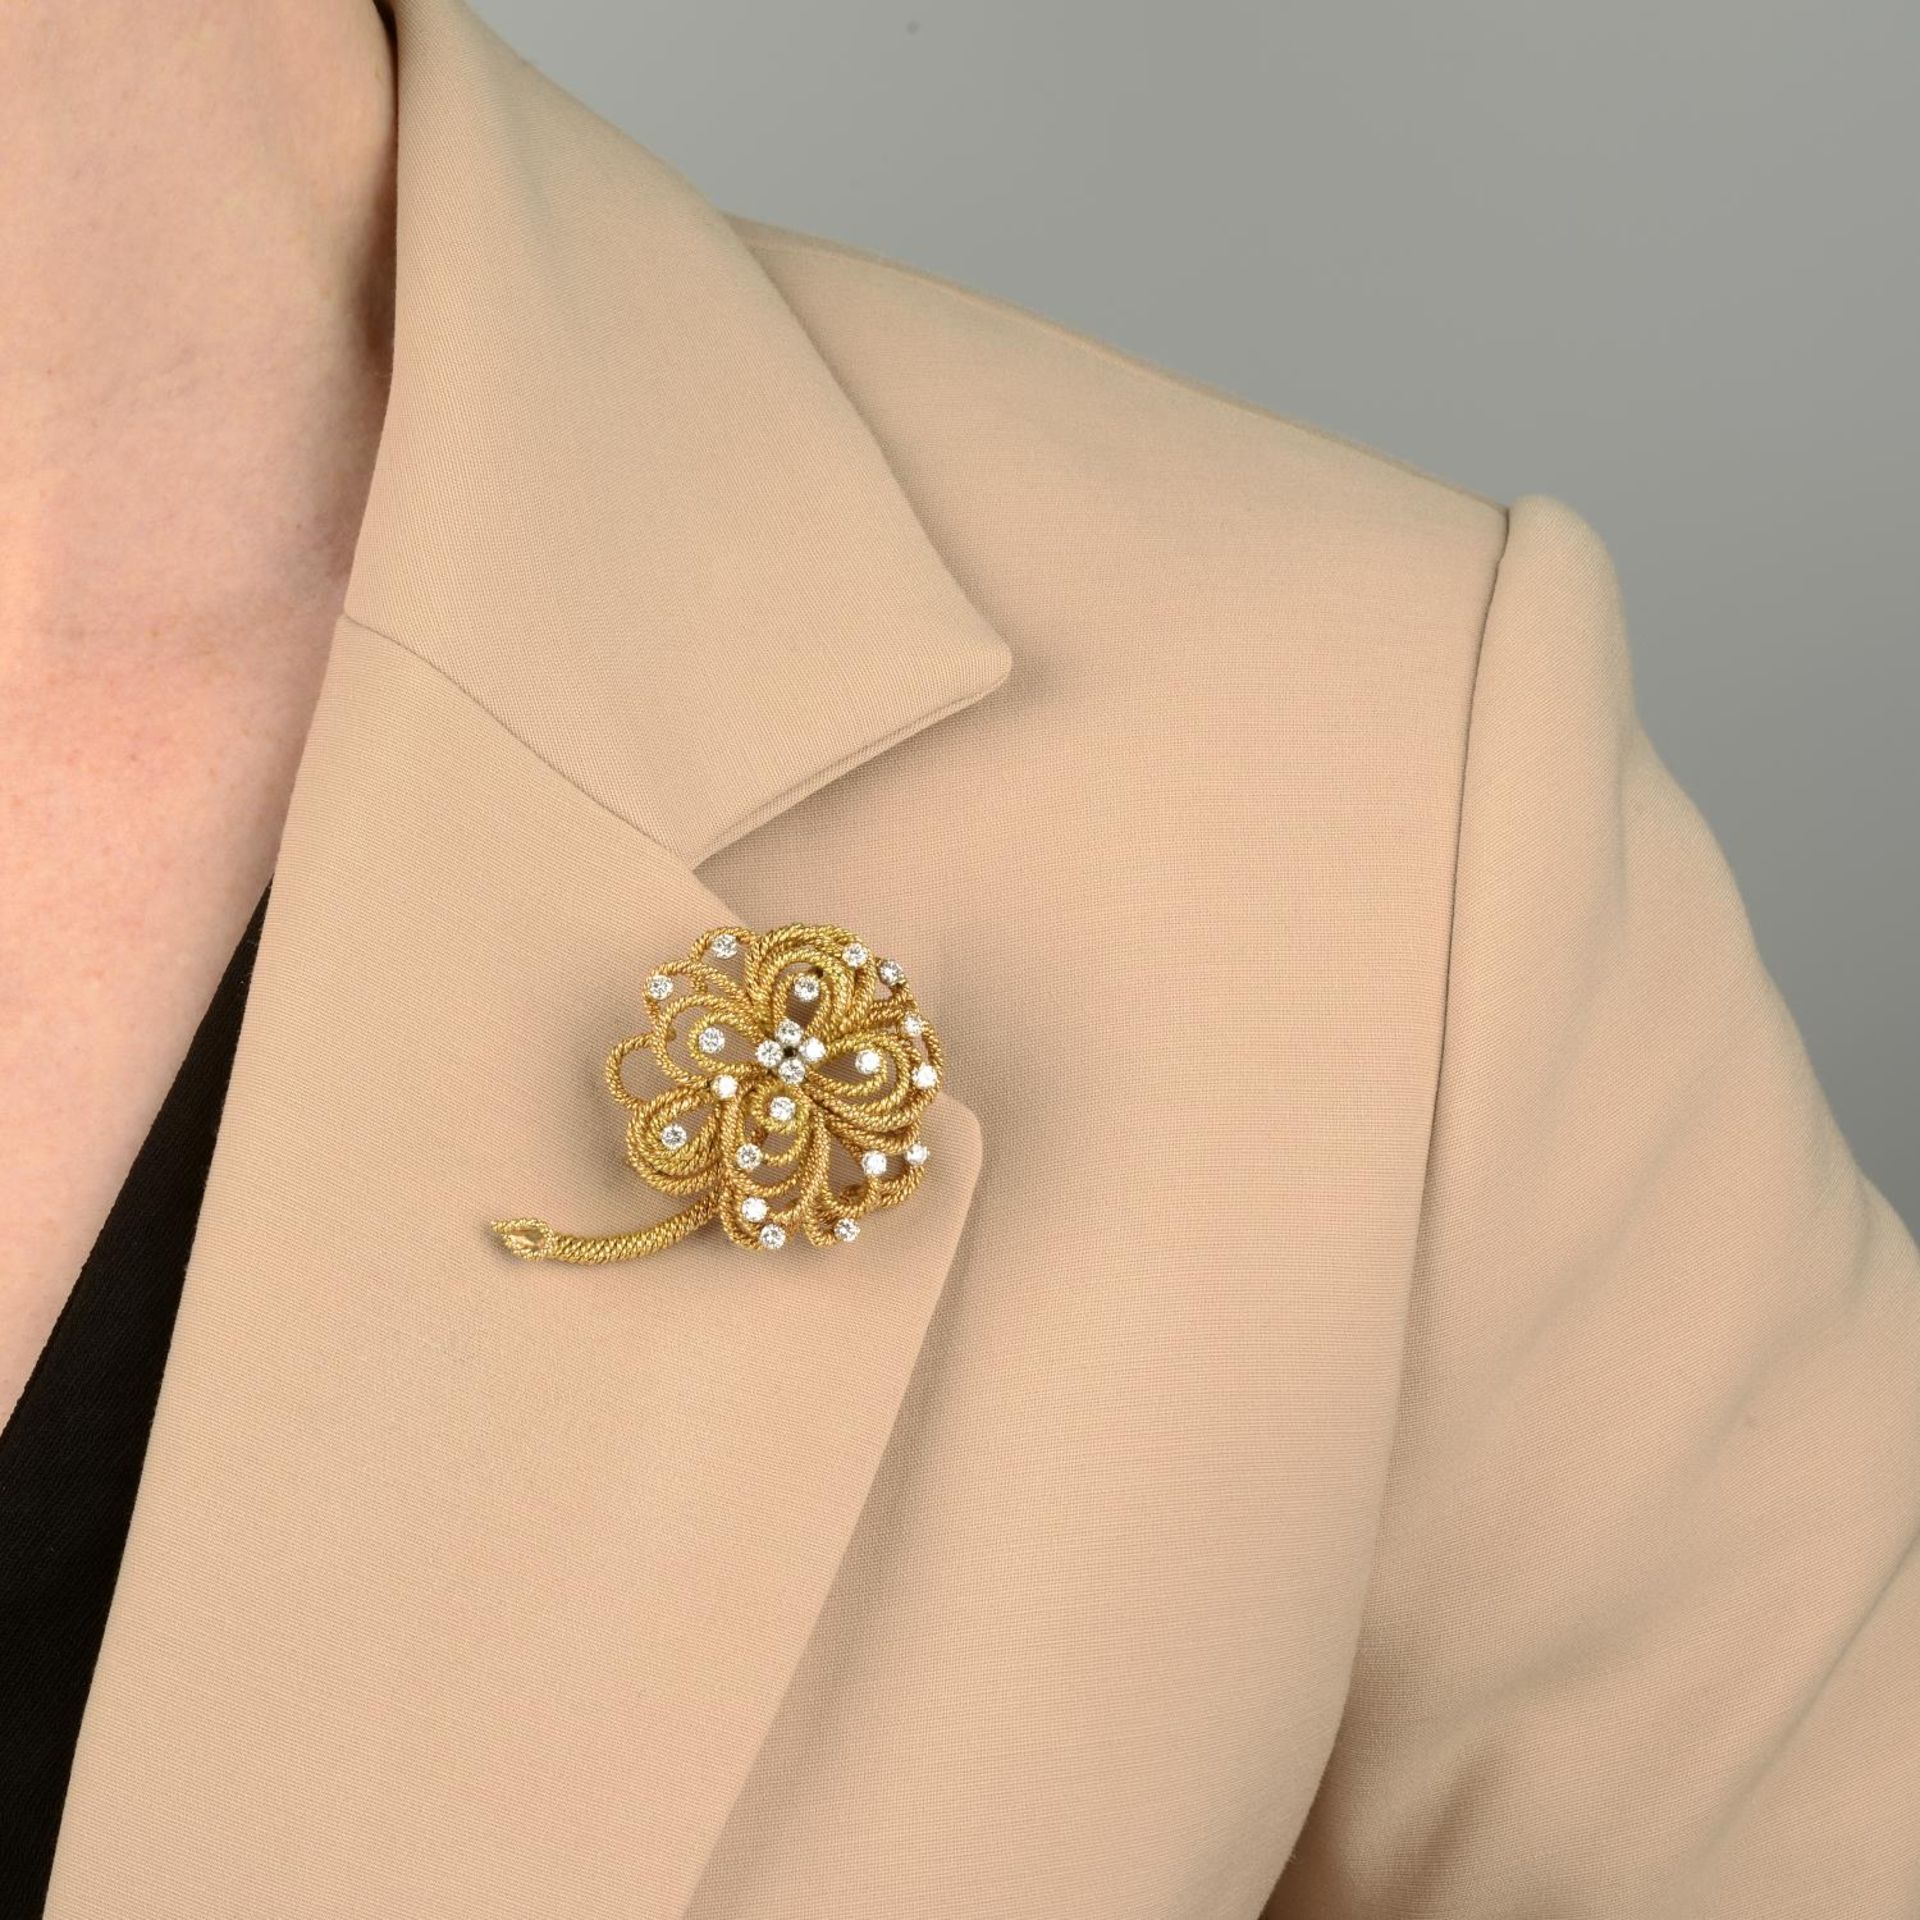 A mid 20th century diamond floral brooch, by Vourakis. - Image 5 of 6